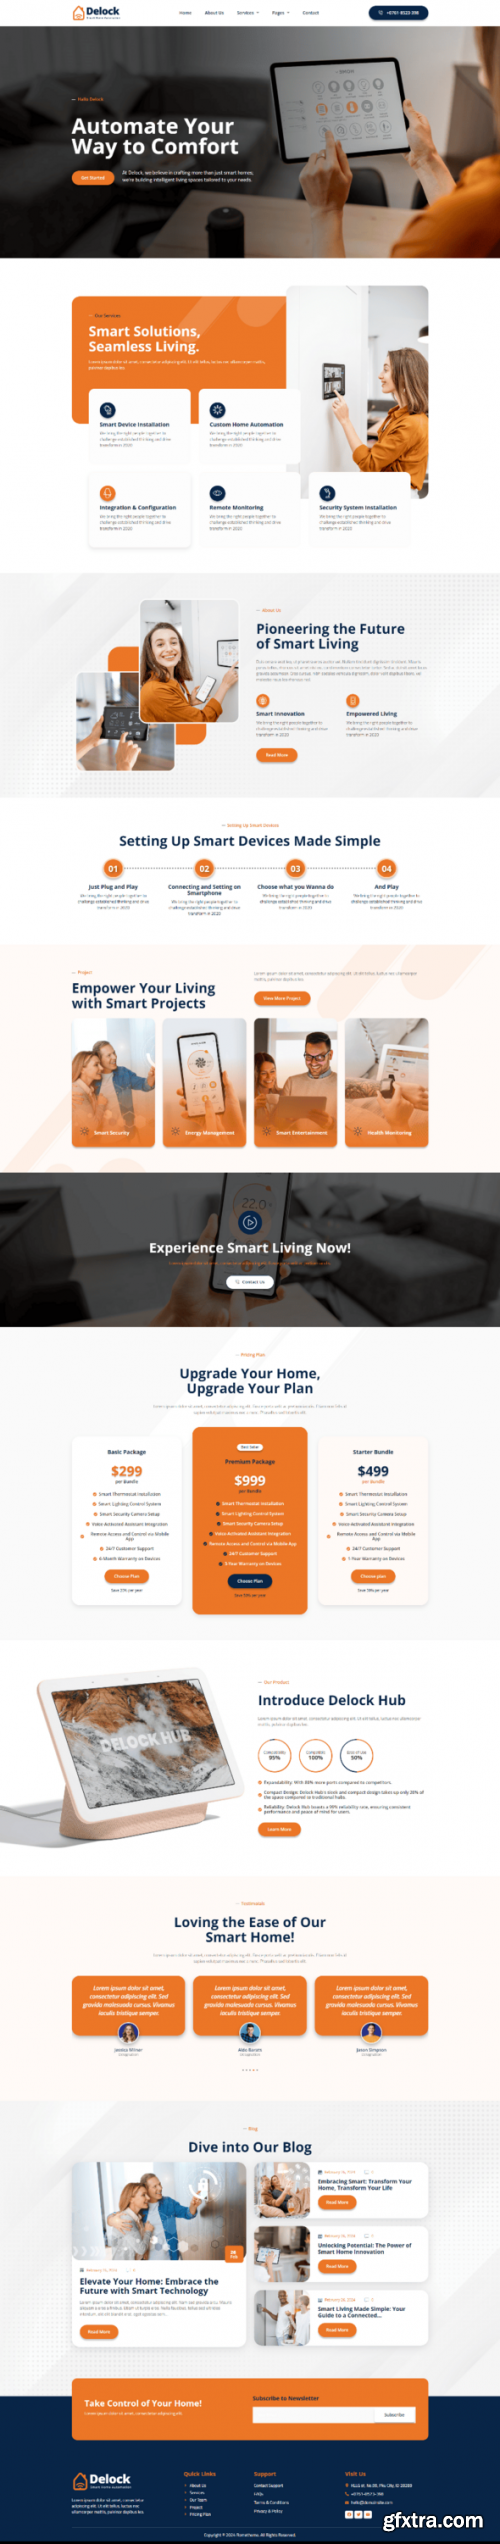 Themeforest - Delock - Smart Home Automation Elementor Template Kit 51075000 v1.0.0 - Nulled